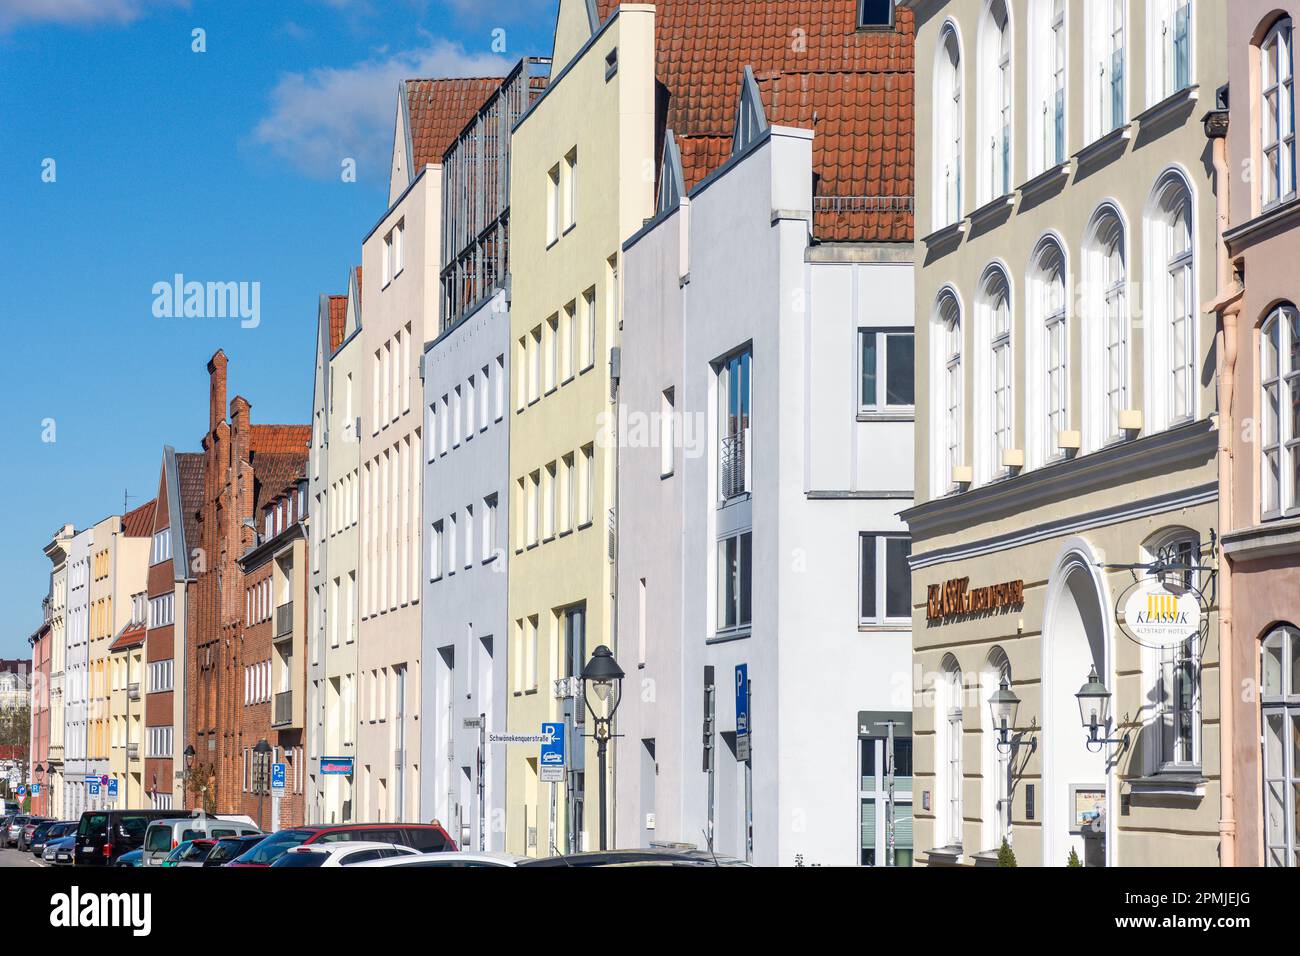 Period buildings in Old Town, Fischstraße, Lübeck, Schleswig-Holstein, Federal Republic of Germany Stock Photo